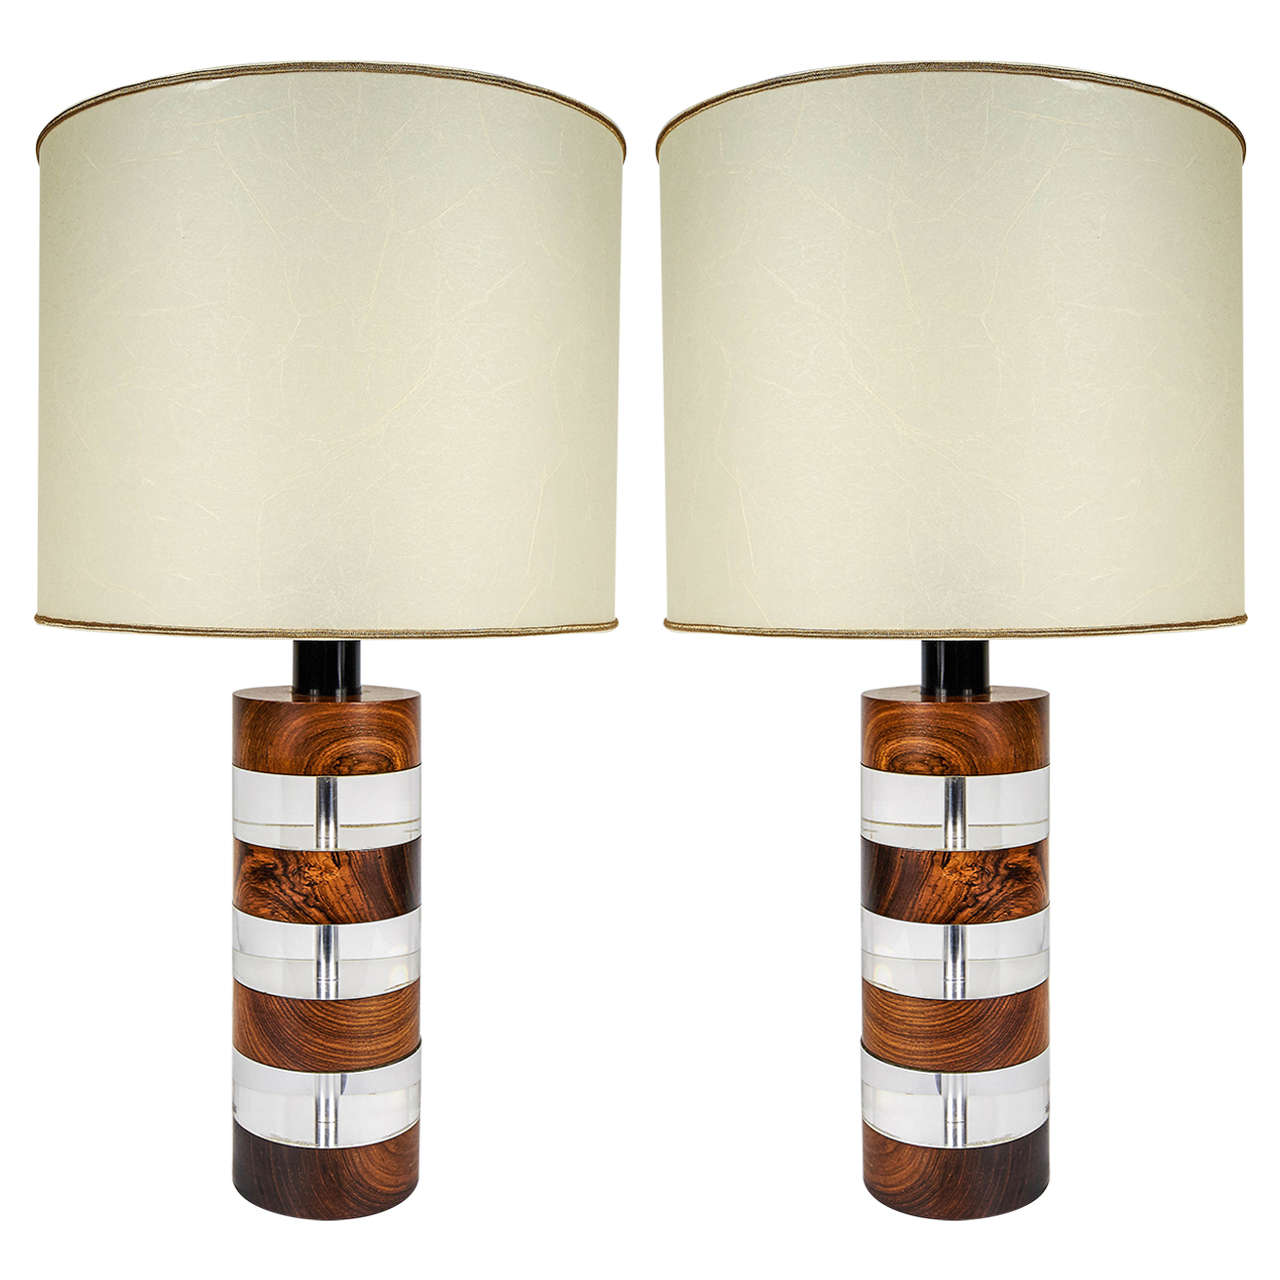 Pair of Italian 1960s-1970s Wood and Lucite Table Lamps by Botta Firenze